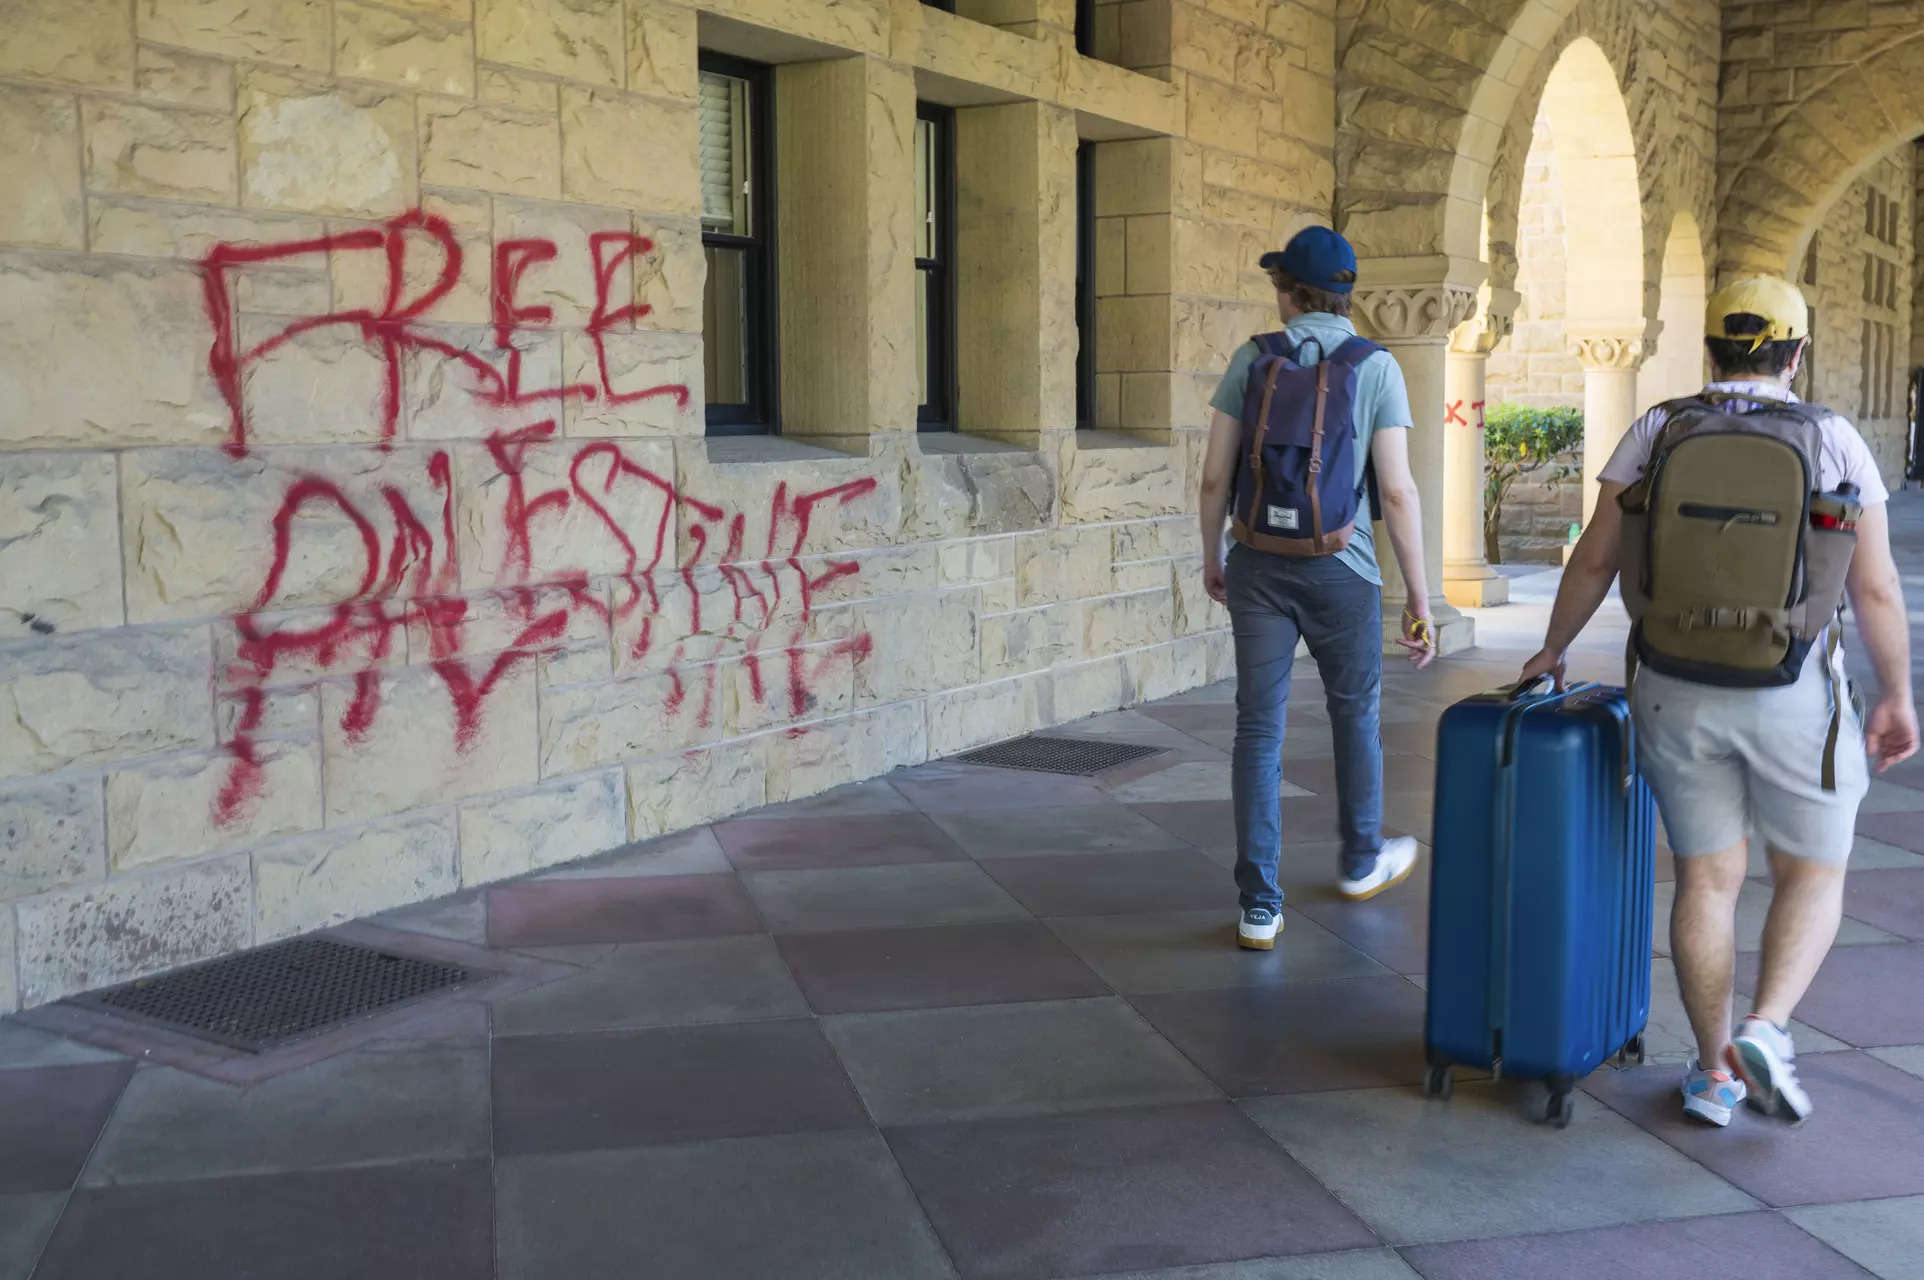 13 protesters who occupied Stanford prez office held